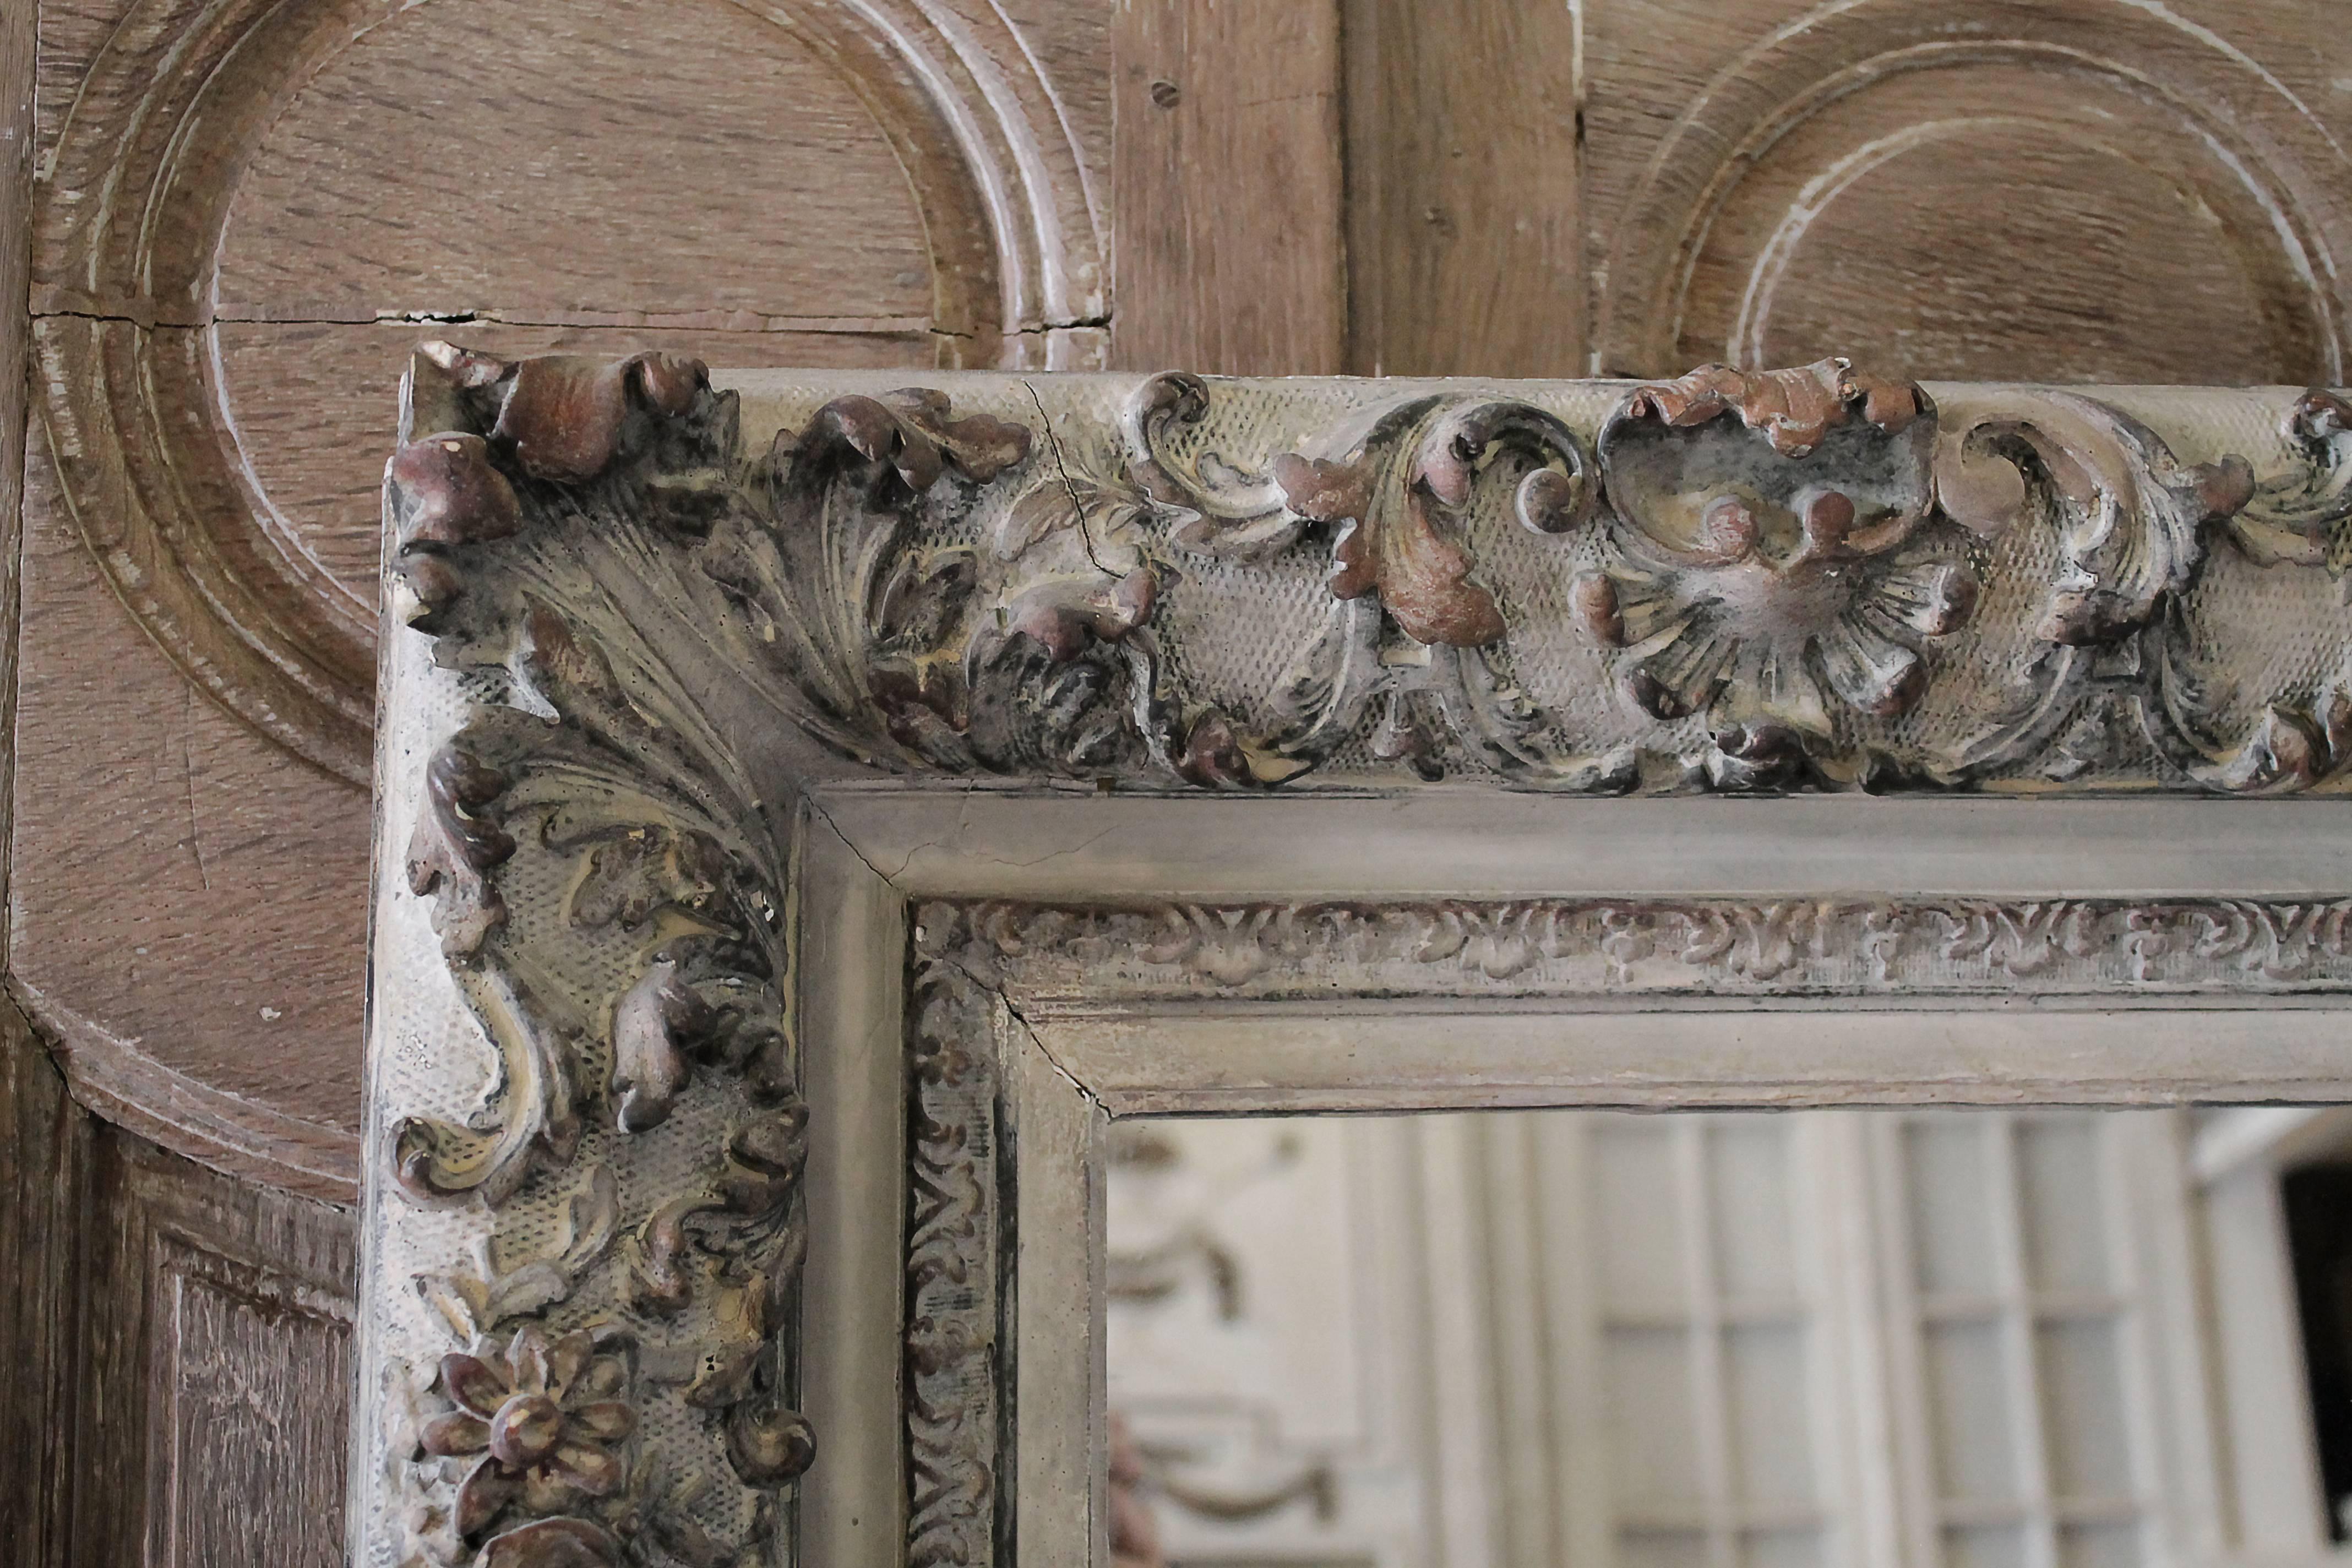 Large rectangular painted carved style mirror.
The frame is wood with a gesso, or plaster decorative front. Some corner areas have chipped edges, as shown in photo, nothing major, very minor. The original finish is a pale putty, or soft grey color,